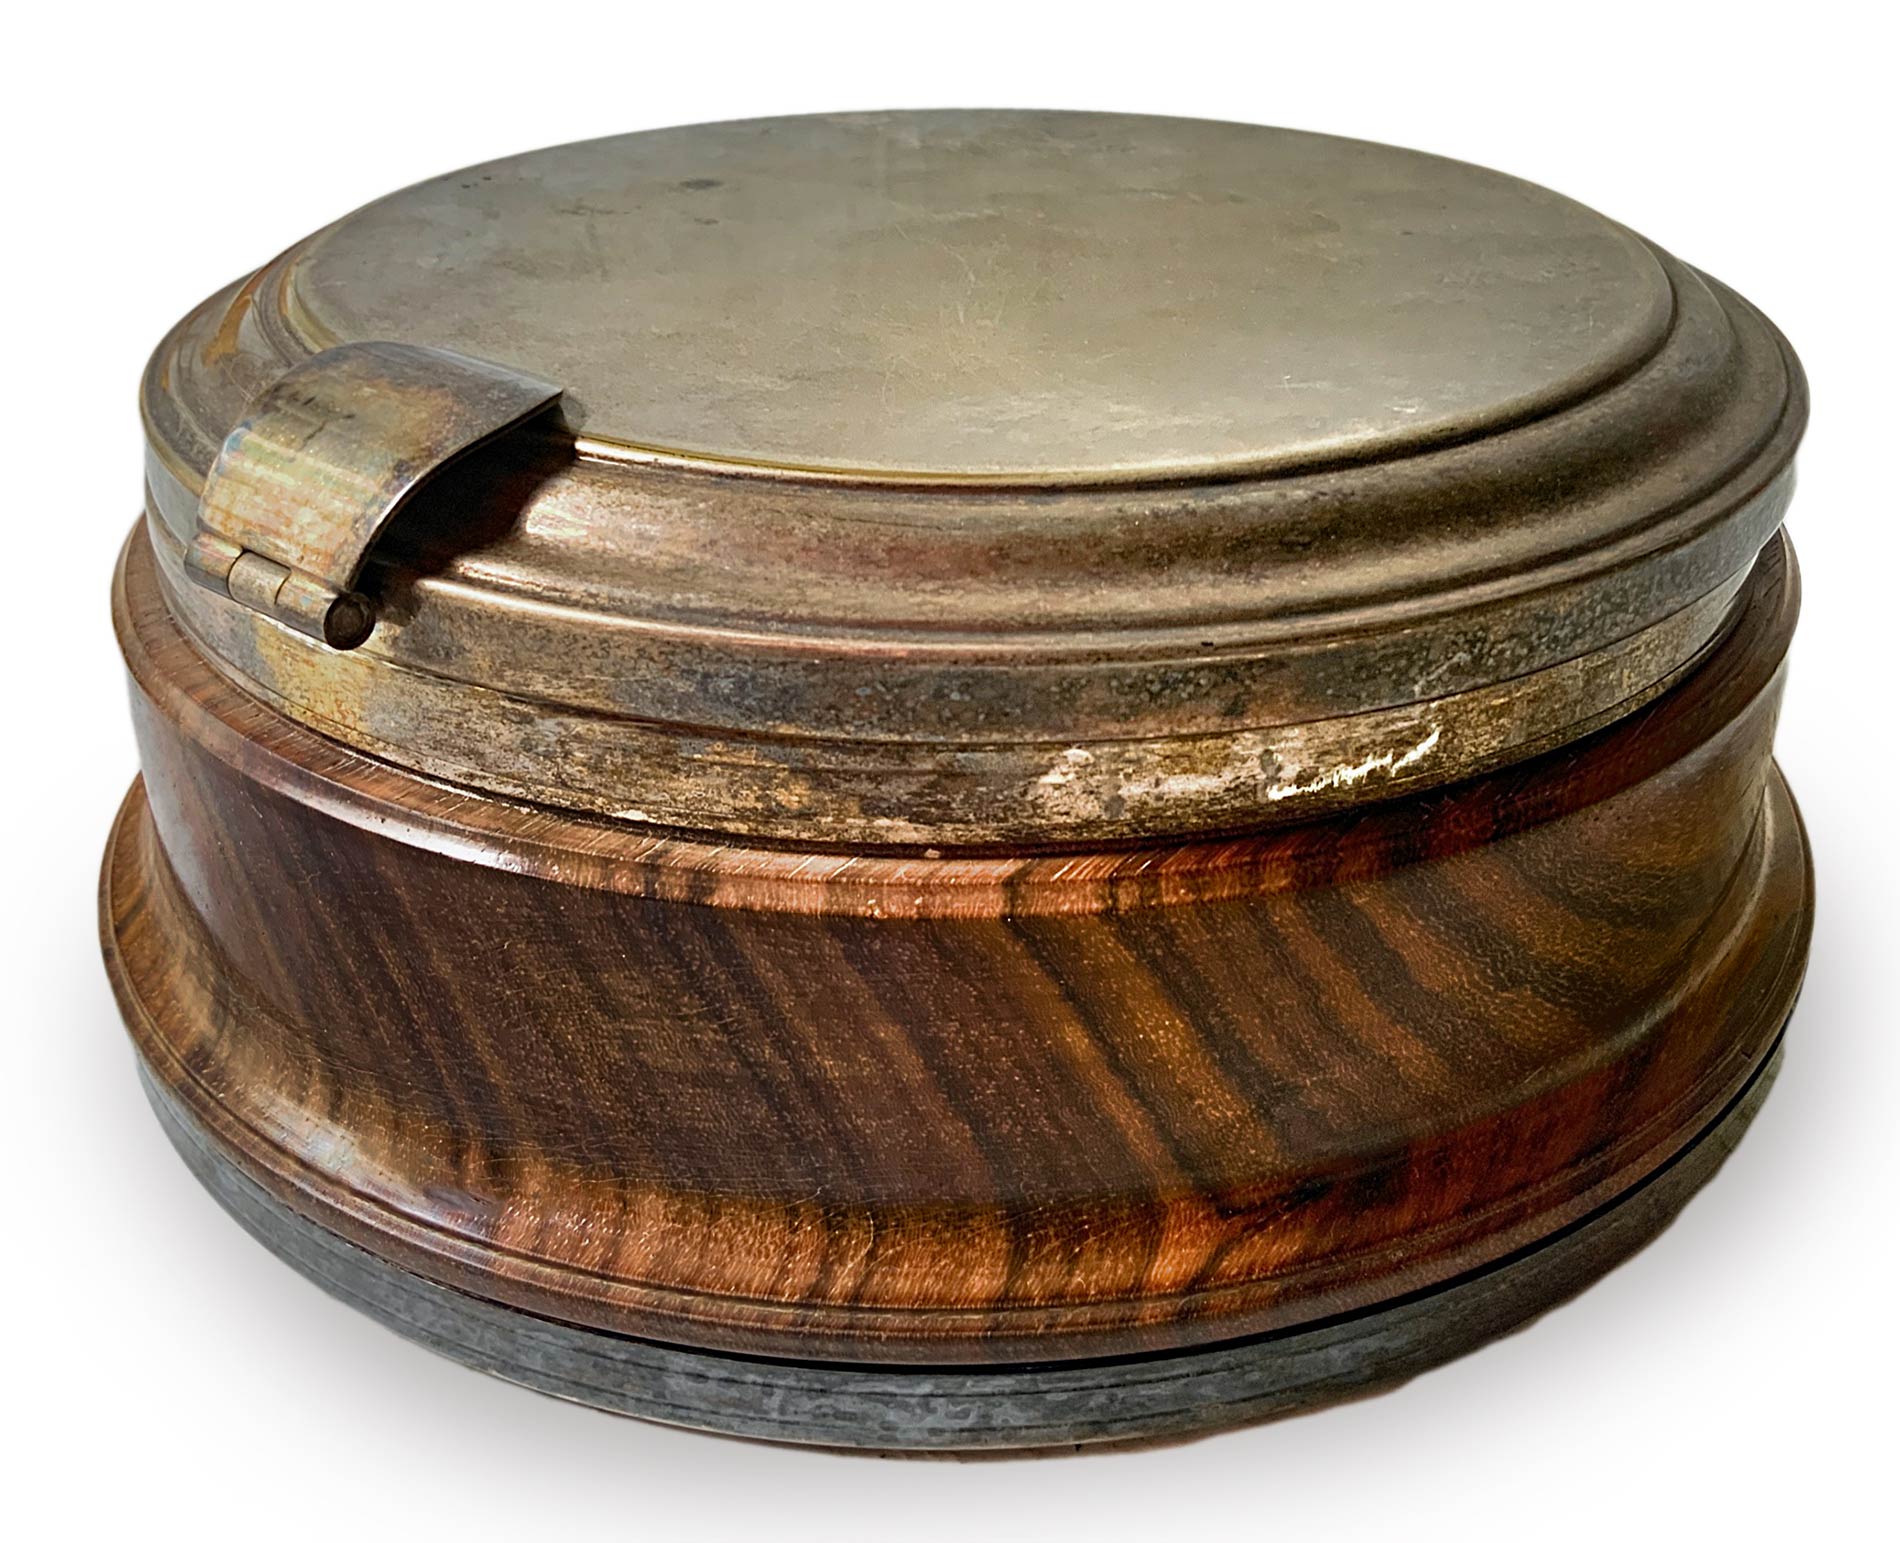 Italian Production, compost in a circular base form of walnut and silver metal lid, Wear and tear.